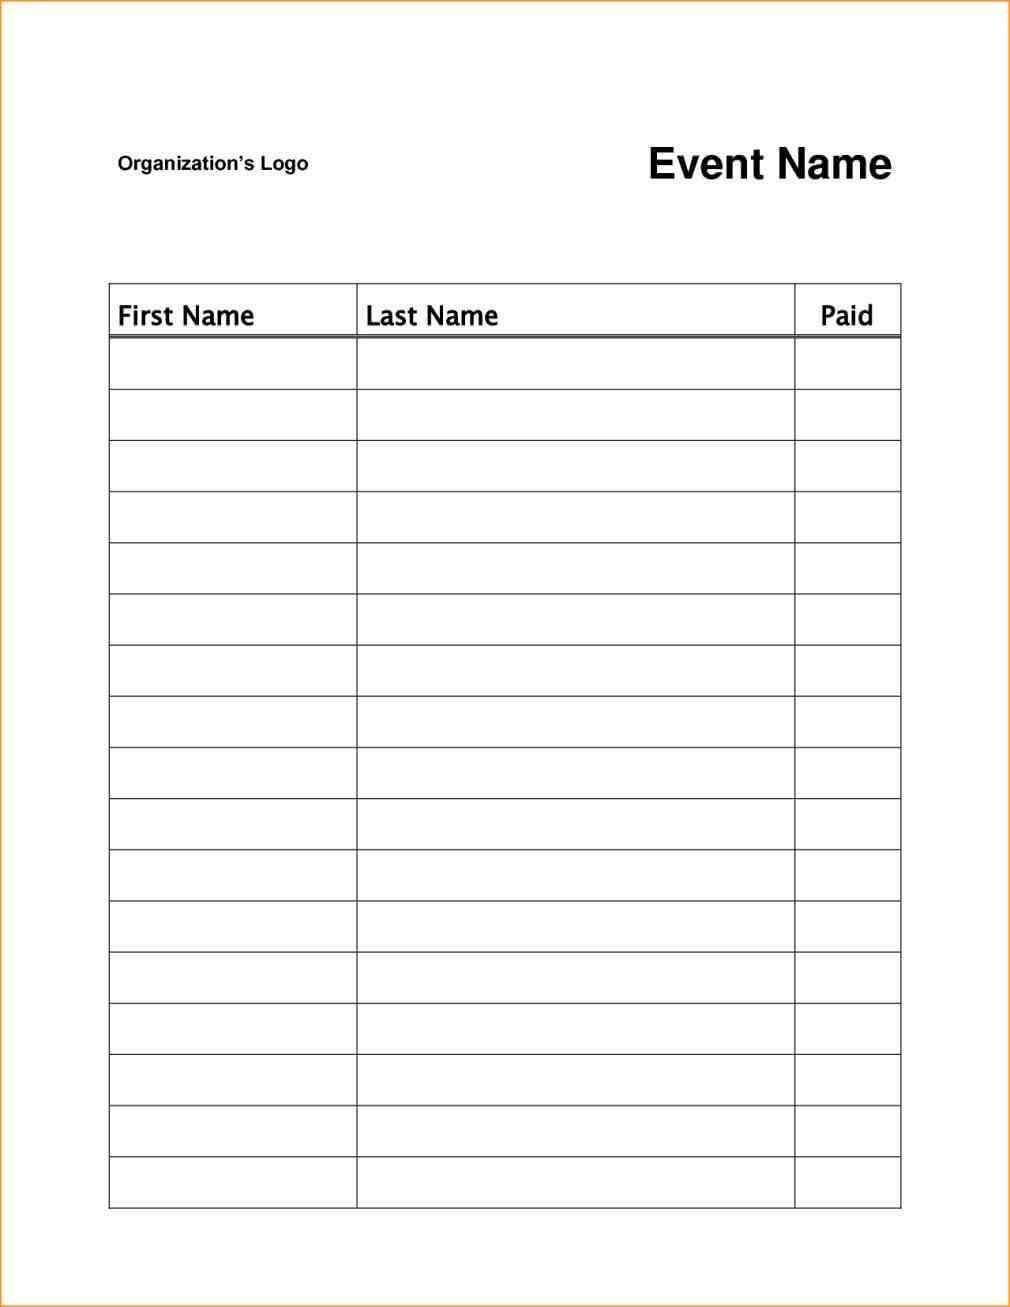 Event Or Class Workshop Forms A Sign Up Sheet Template Word With Regard To Free Sign Up Sheet Template Word